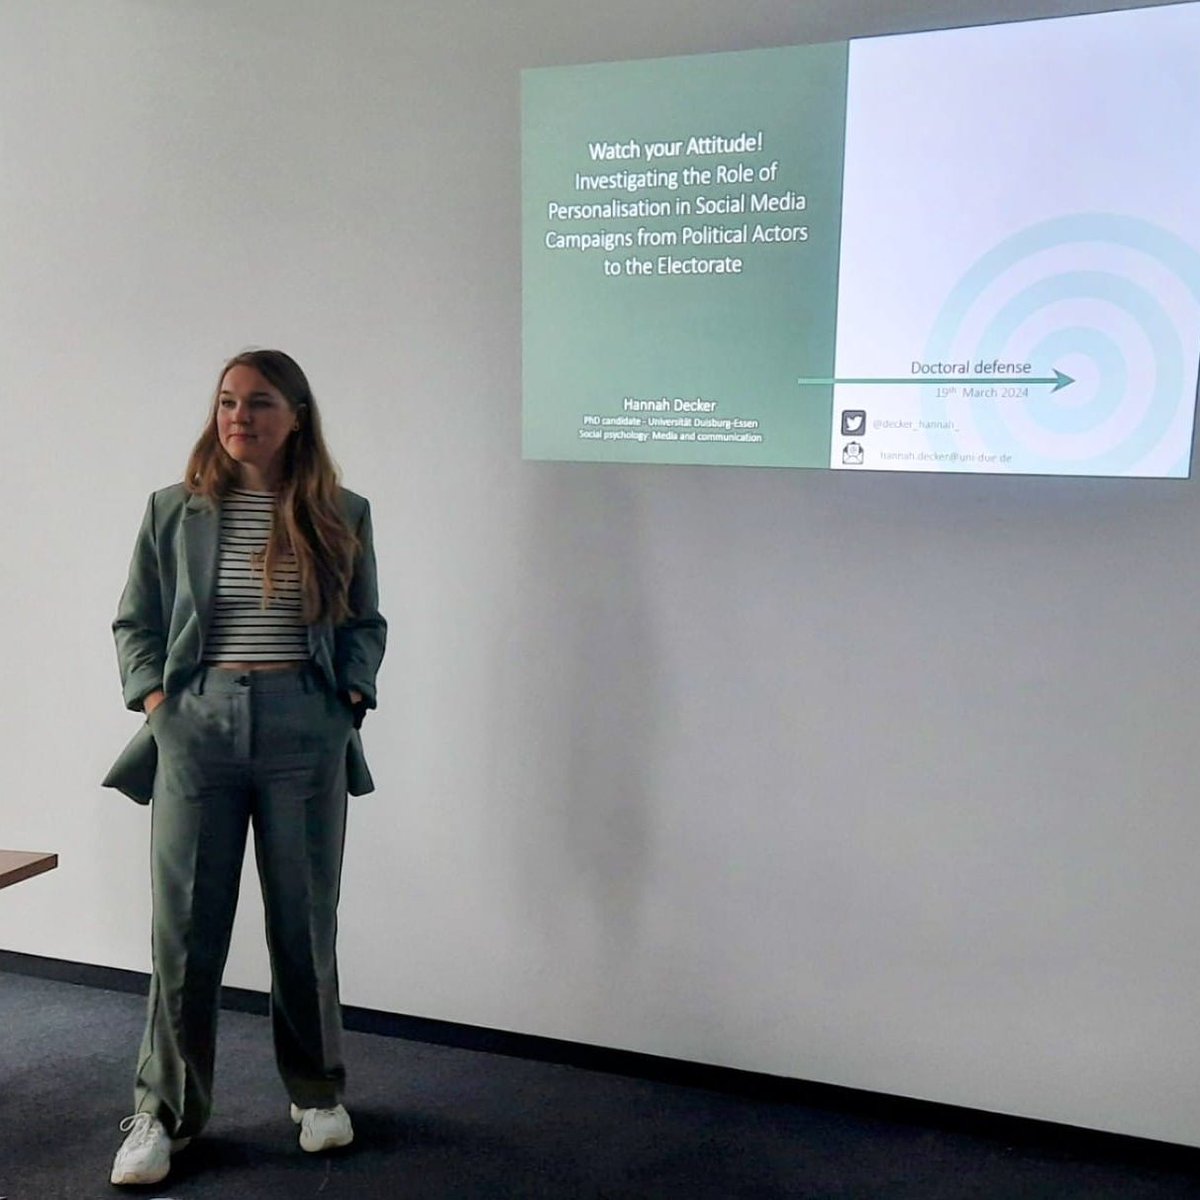 Part II is done! ✅Three weeks ago I defended my thesis after three years of researching political campaigns and the role of personalisation on social media. A little break is more than needed: to rest, process this exhausting but rewarding last months and travel to #ICA24! 🏝️